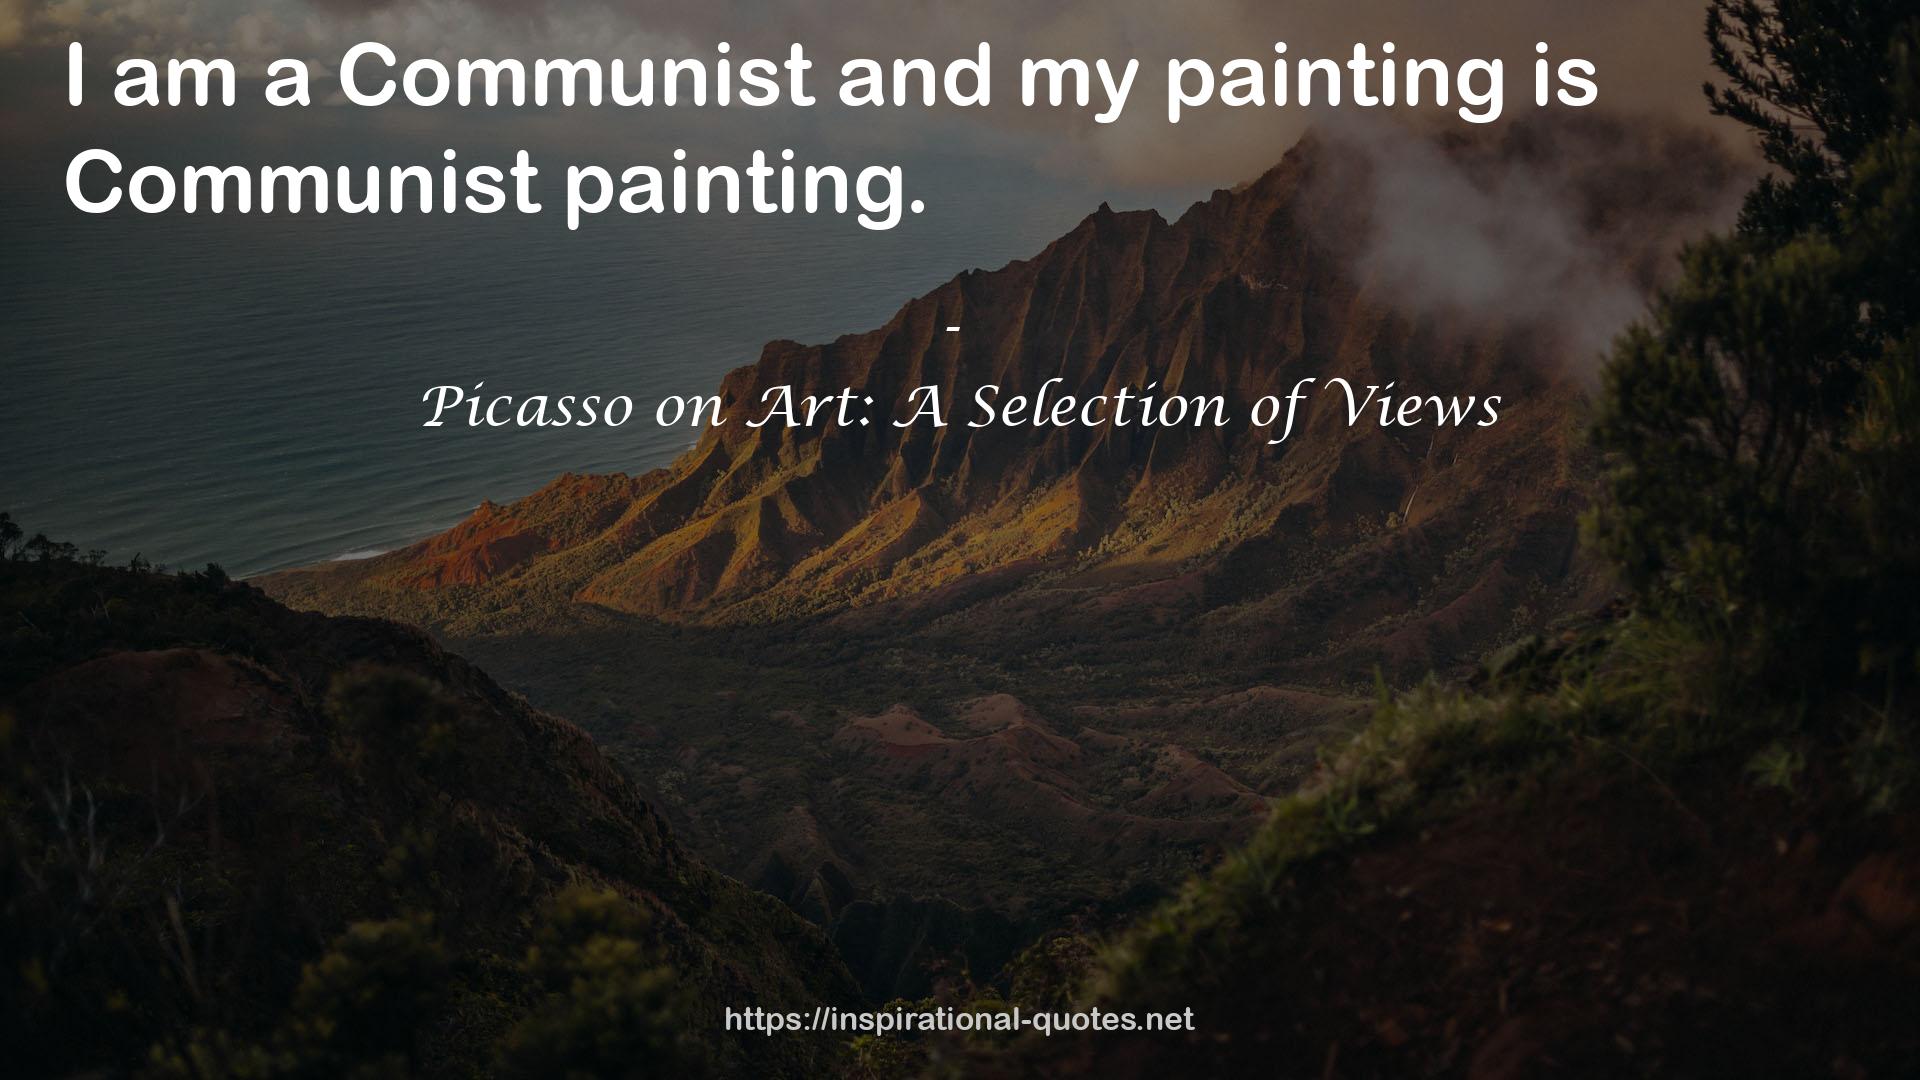 Picasso on Art: A Selection of Views QUOTES